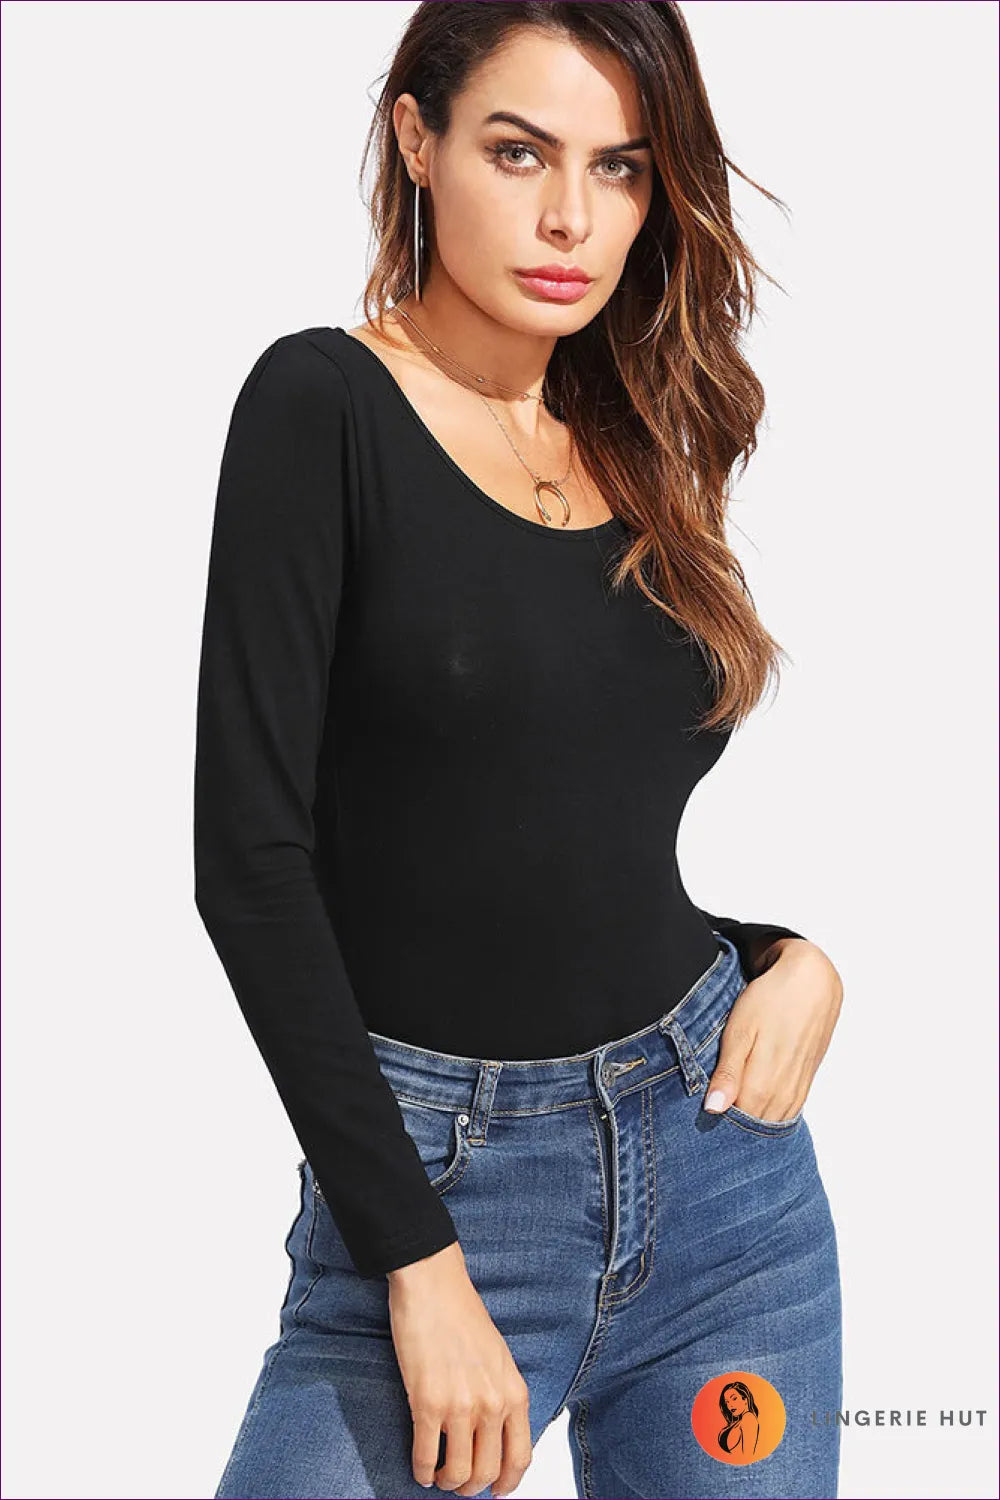 Elevate Your Wardrobe With Our Round Neck Backless Long Sleeve Bodysuit. Flattering Silhouette, Elegant